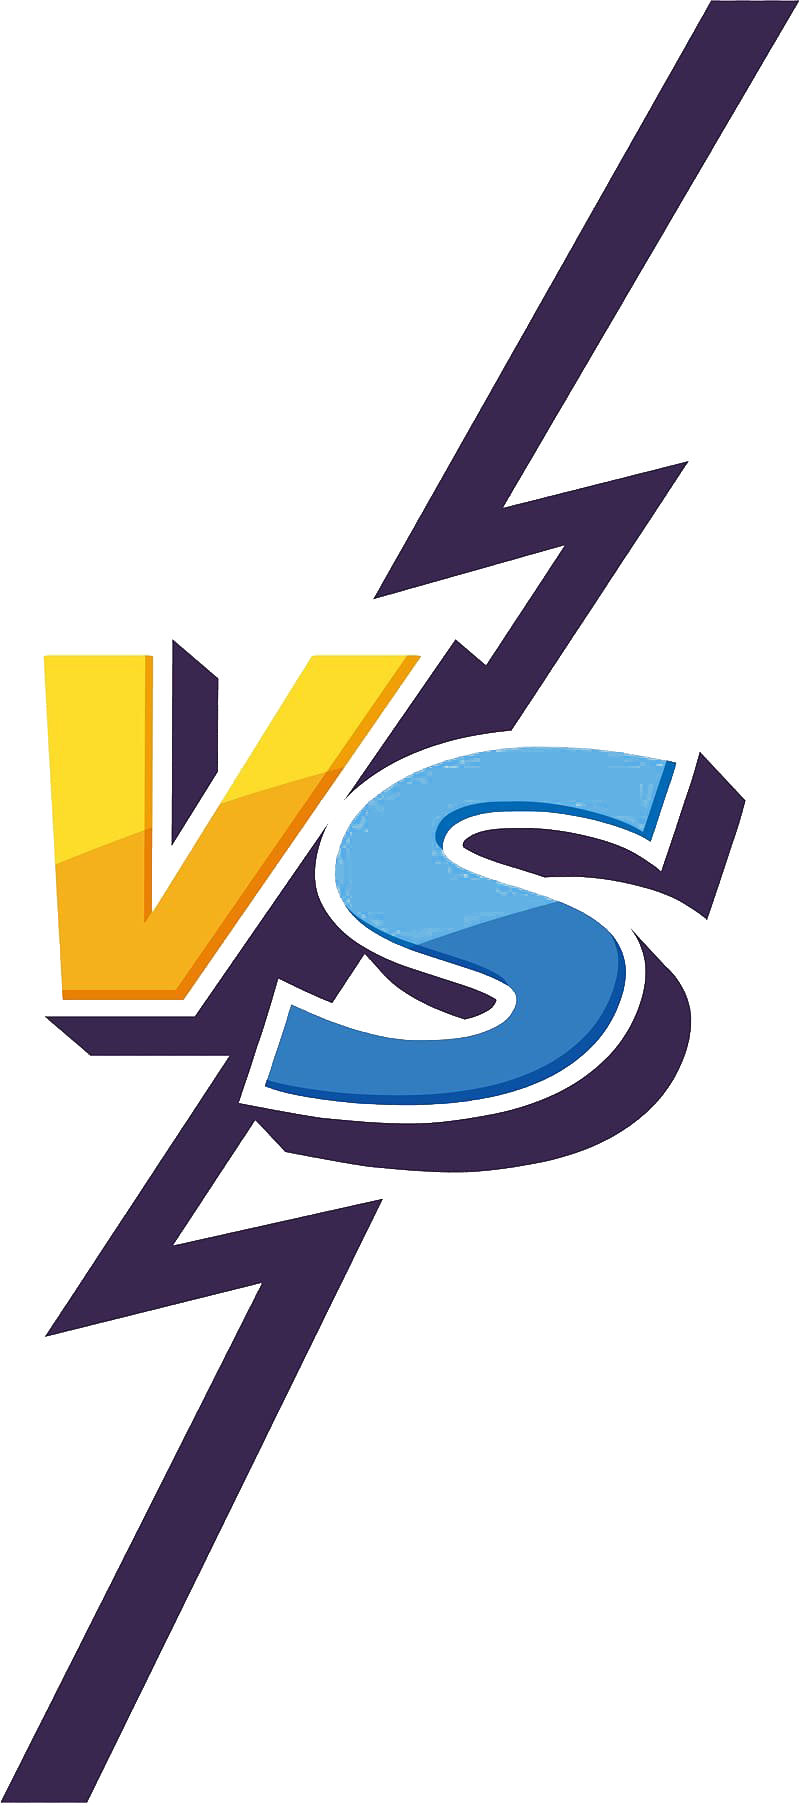 Versus Logo Vs Png | Images and Photos finder